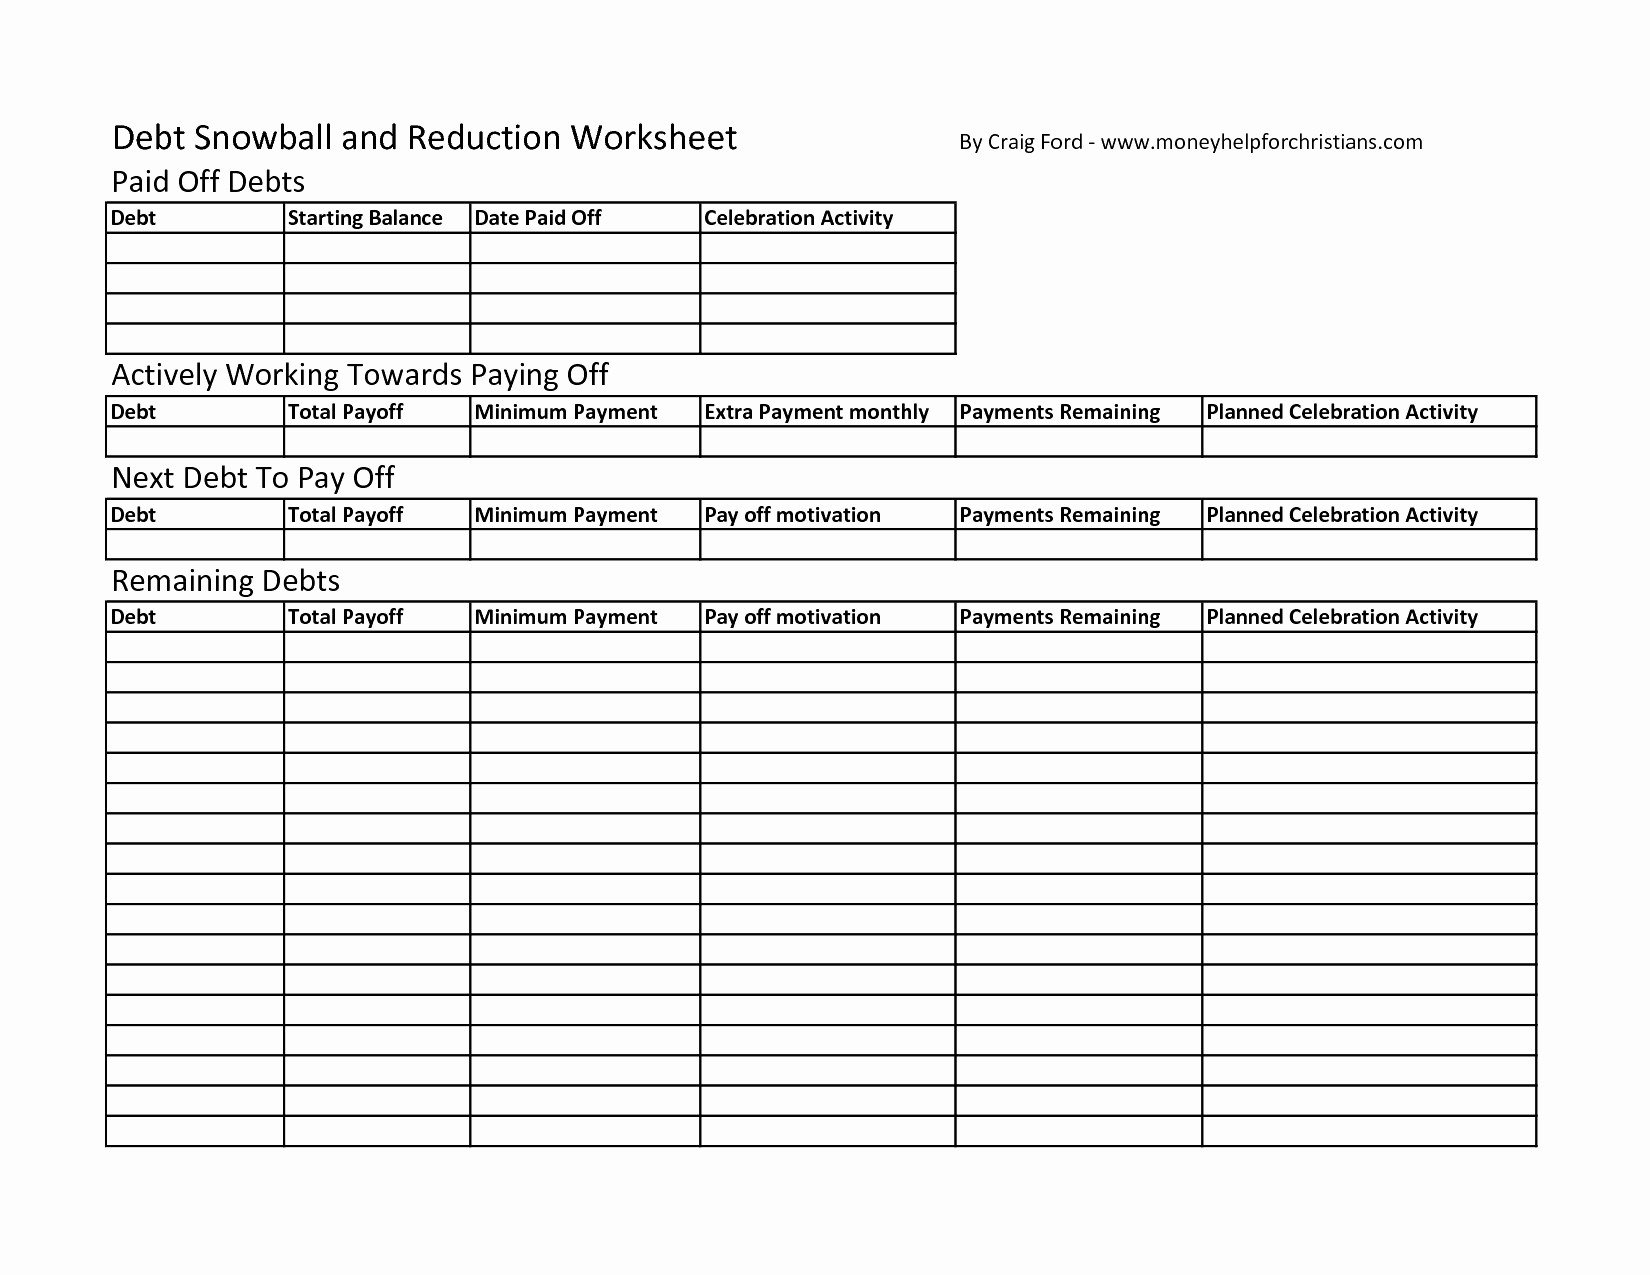 Spreadsheet For Paying Off Debt For Dave Ramsey Snowball Worksheet Throughout Dave Ramsey Debt Snowball Worksheet